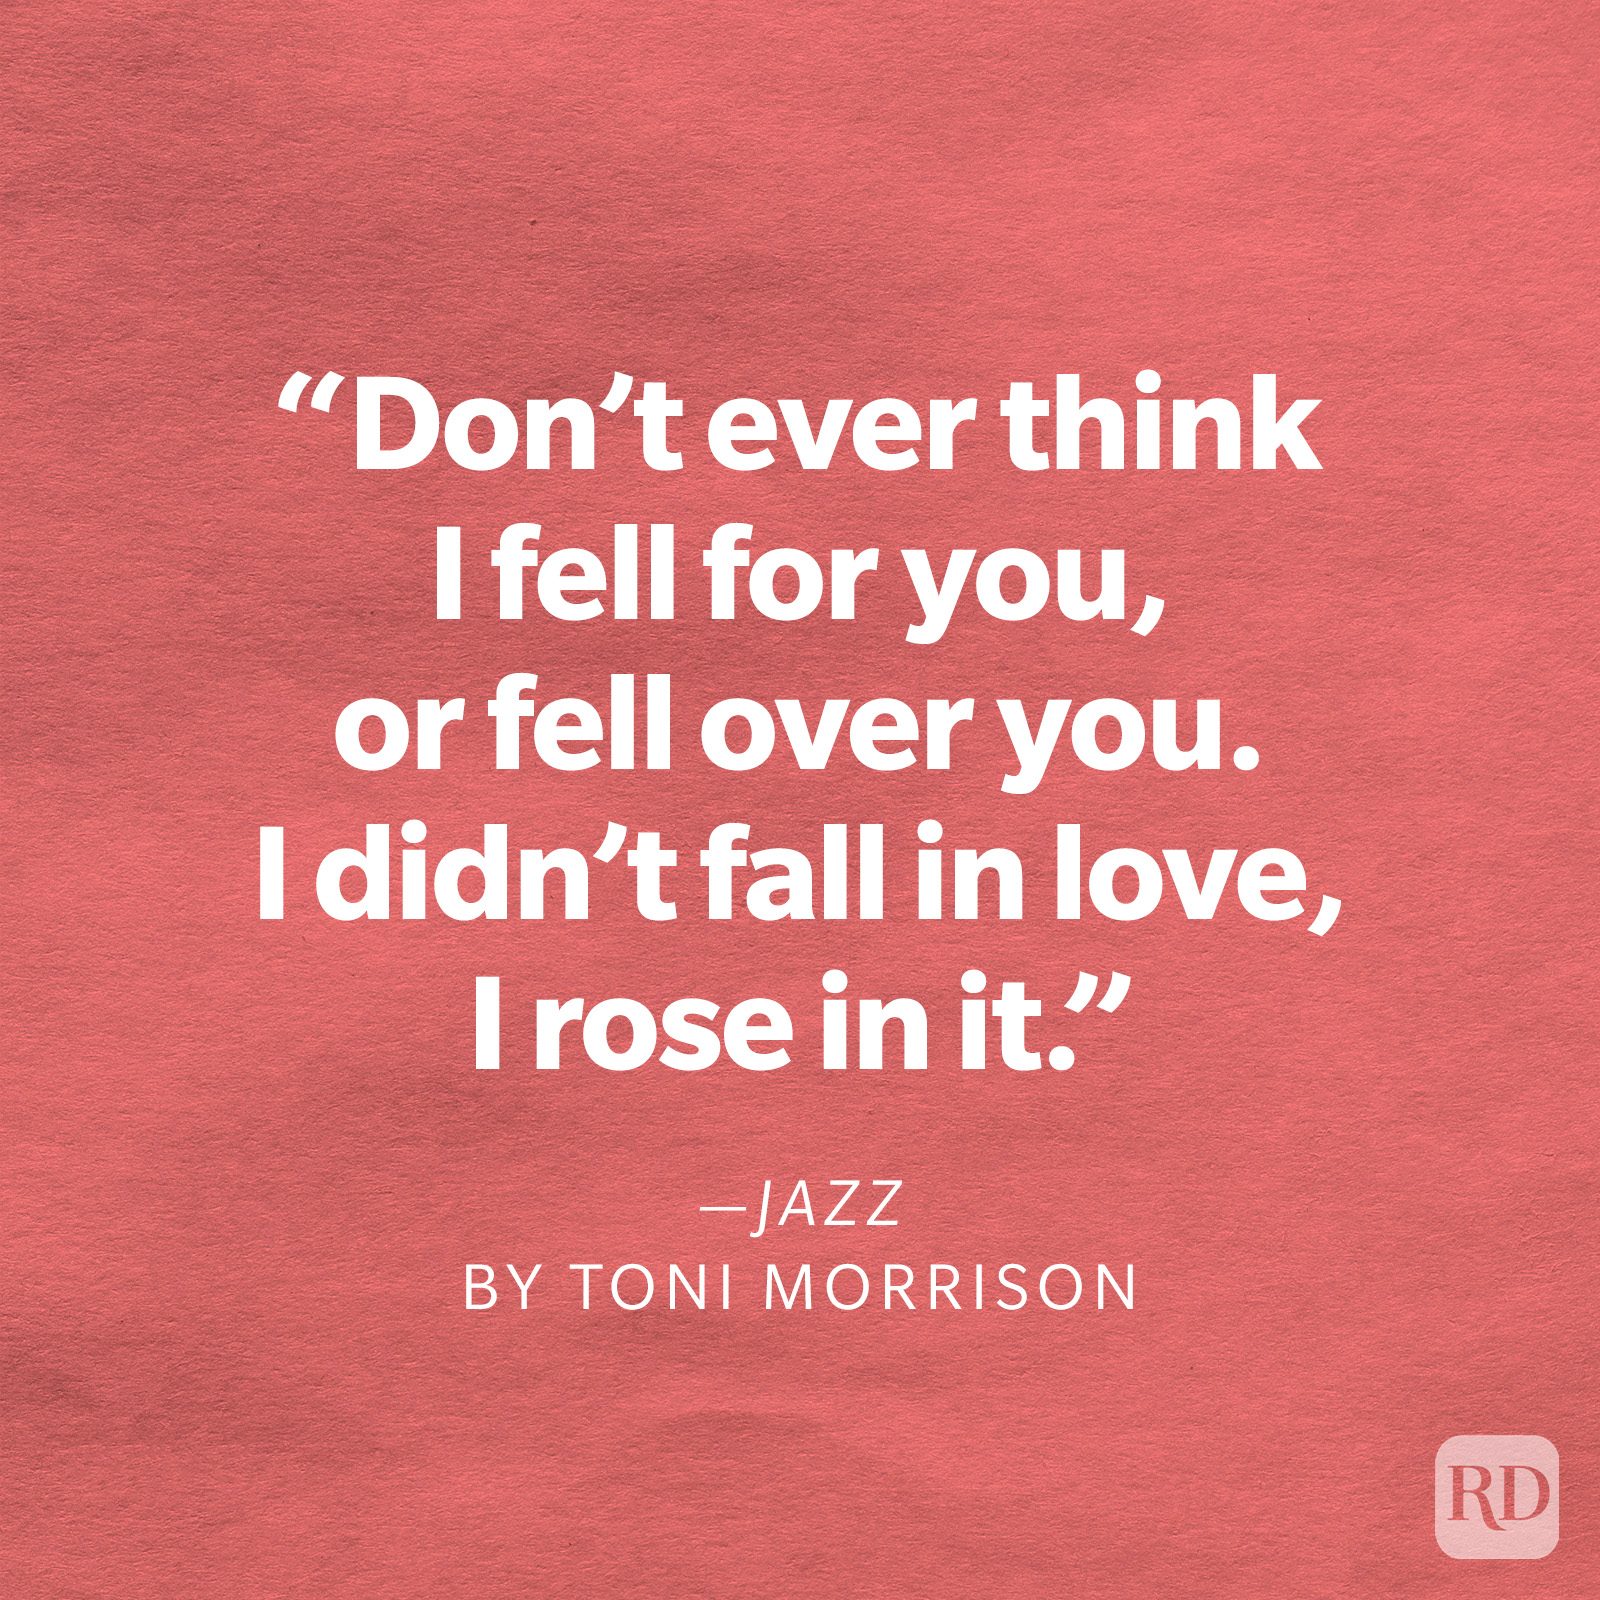 Jazz by Toni Morrison "Don't ever think I fell for you, or fell over you. I didn't fall in love, I rose in it."